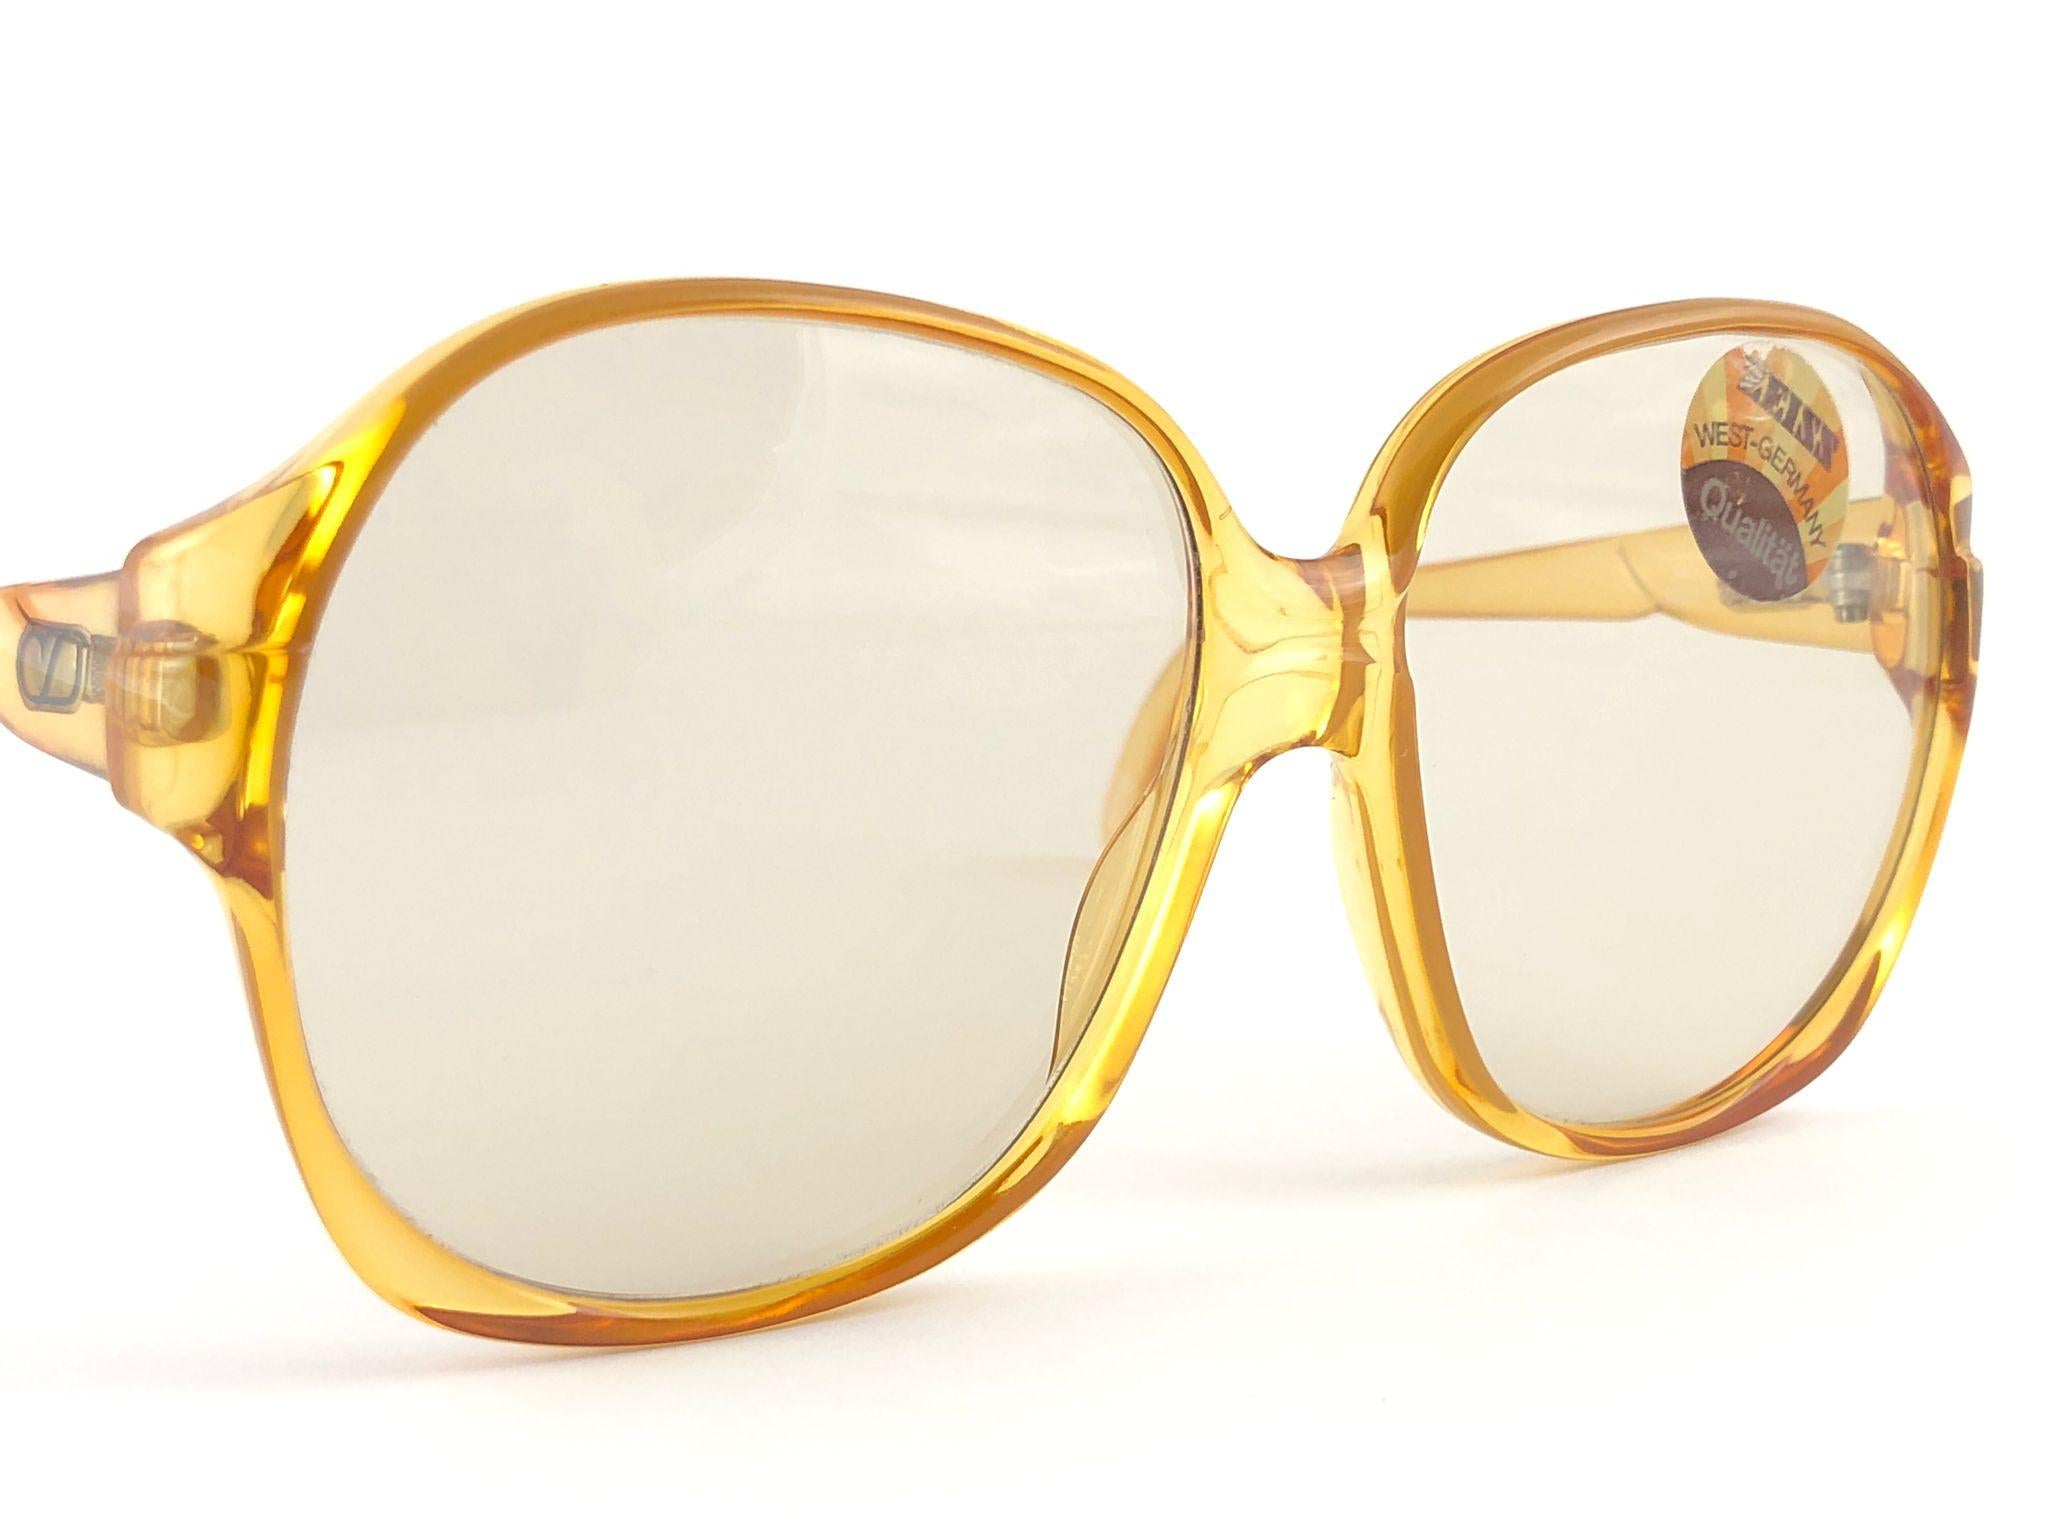 New Vintage Zeiss 8068 Translucent Amber Made W. Germany 1970 Sunglasses In New Condition For Sale In Baleares, Baleares